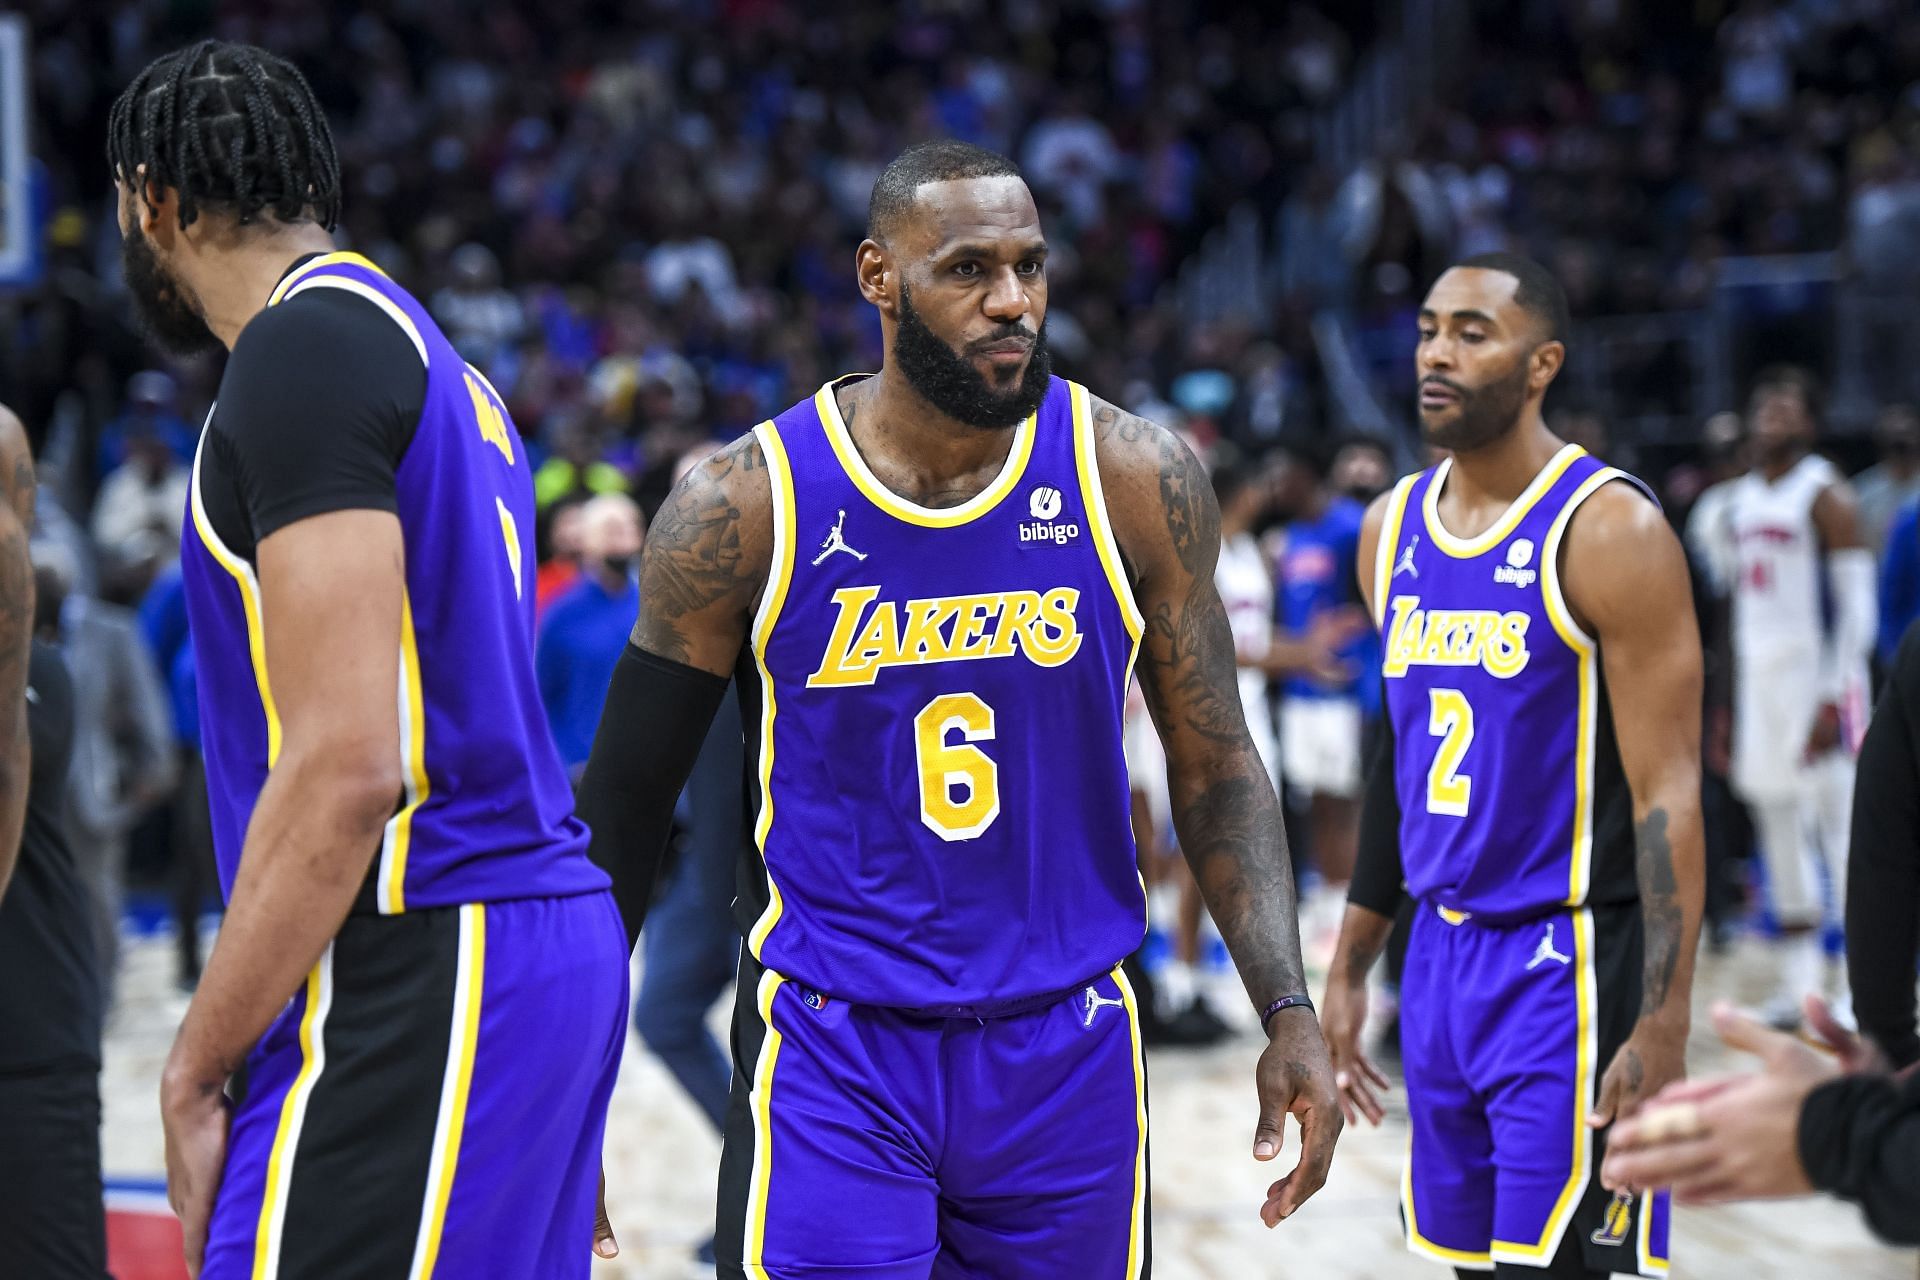 Los Angeles Lakers star LeBron James after his ejection